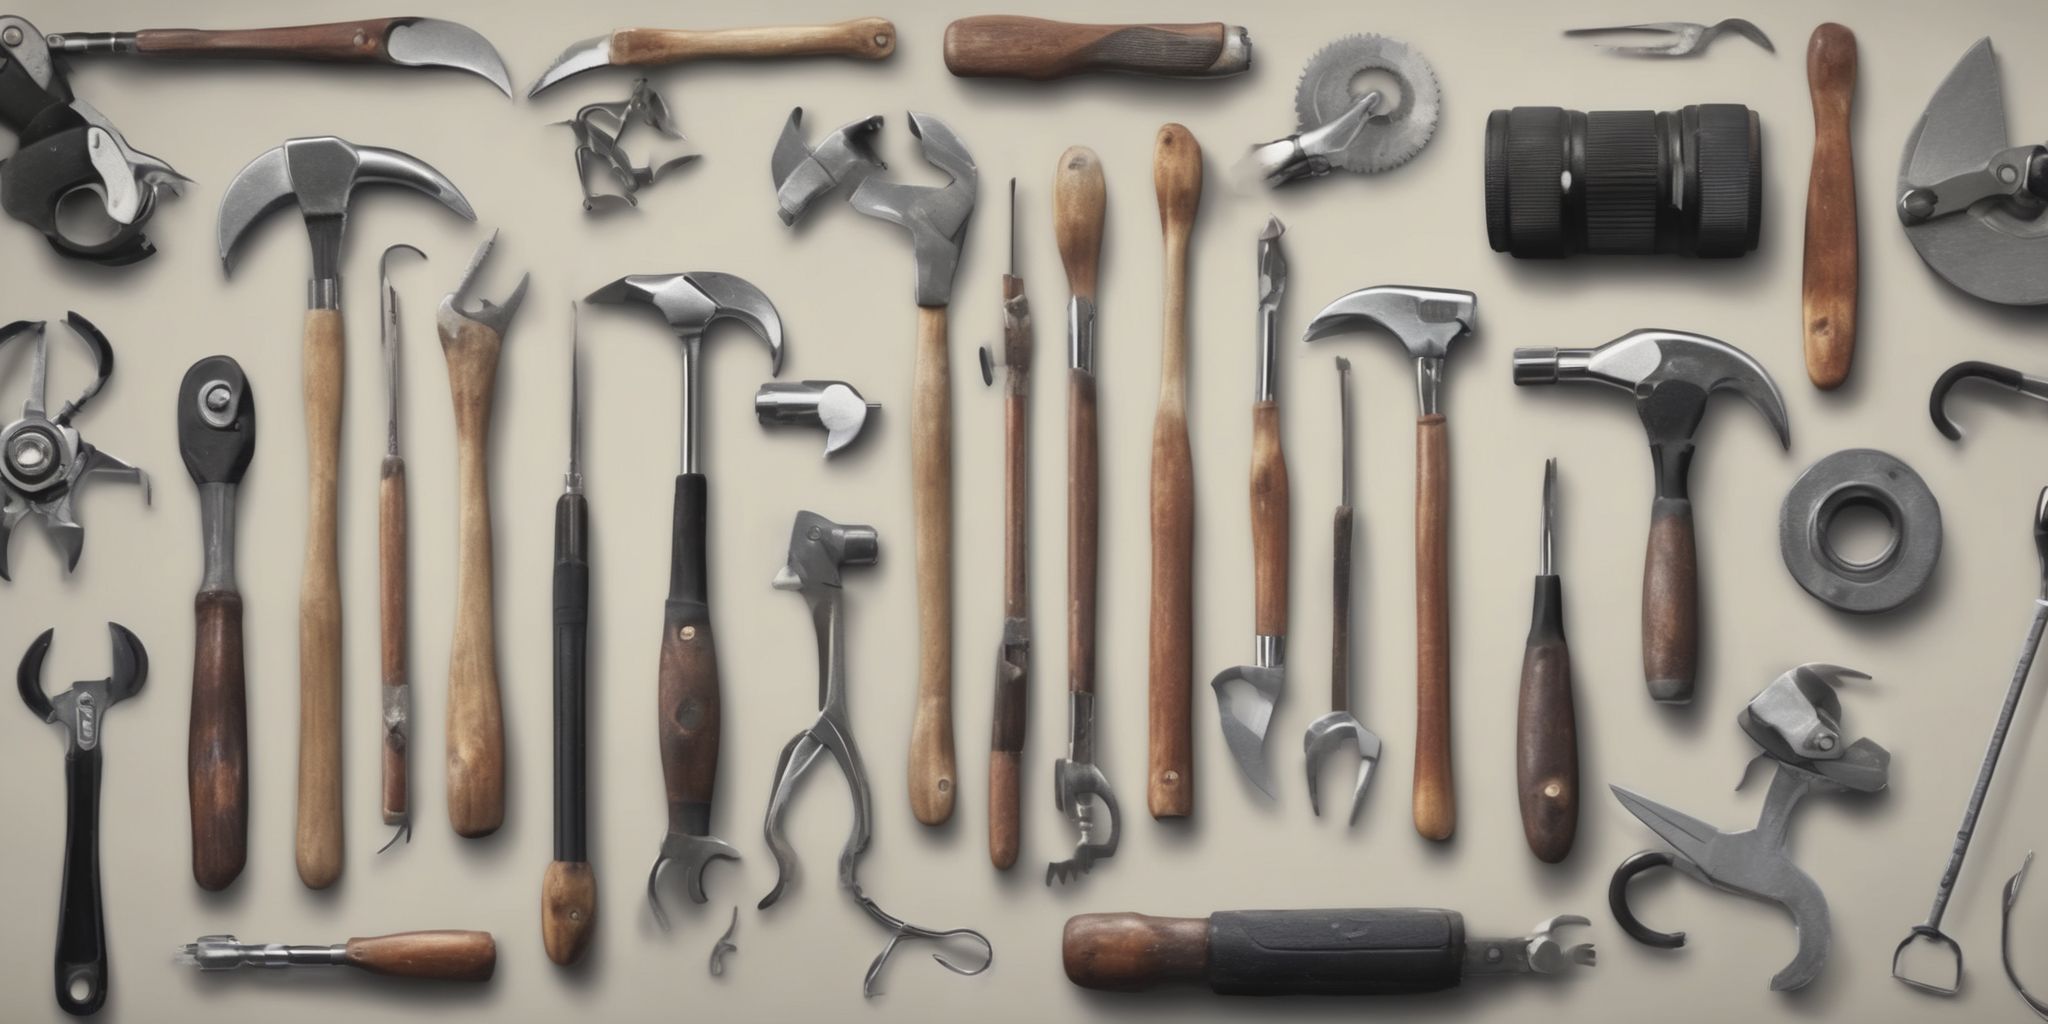 Tools  in realistic, photographic style